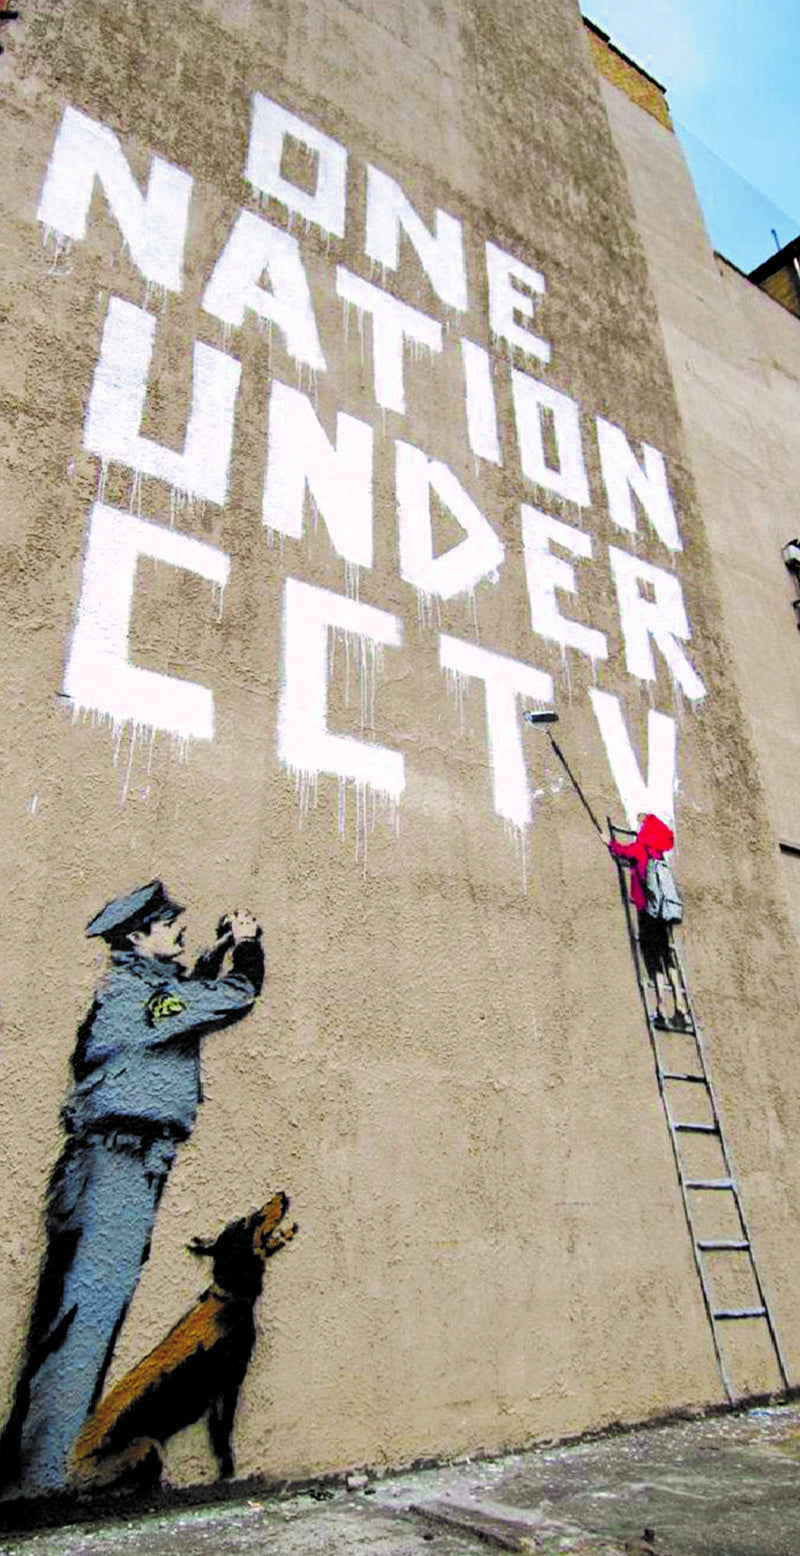 Banksy, a shadowy cipher lights up the street